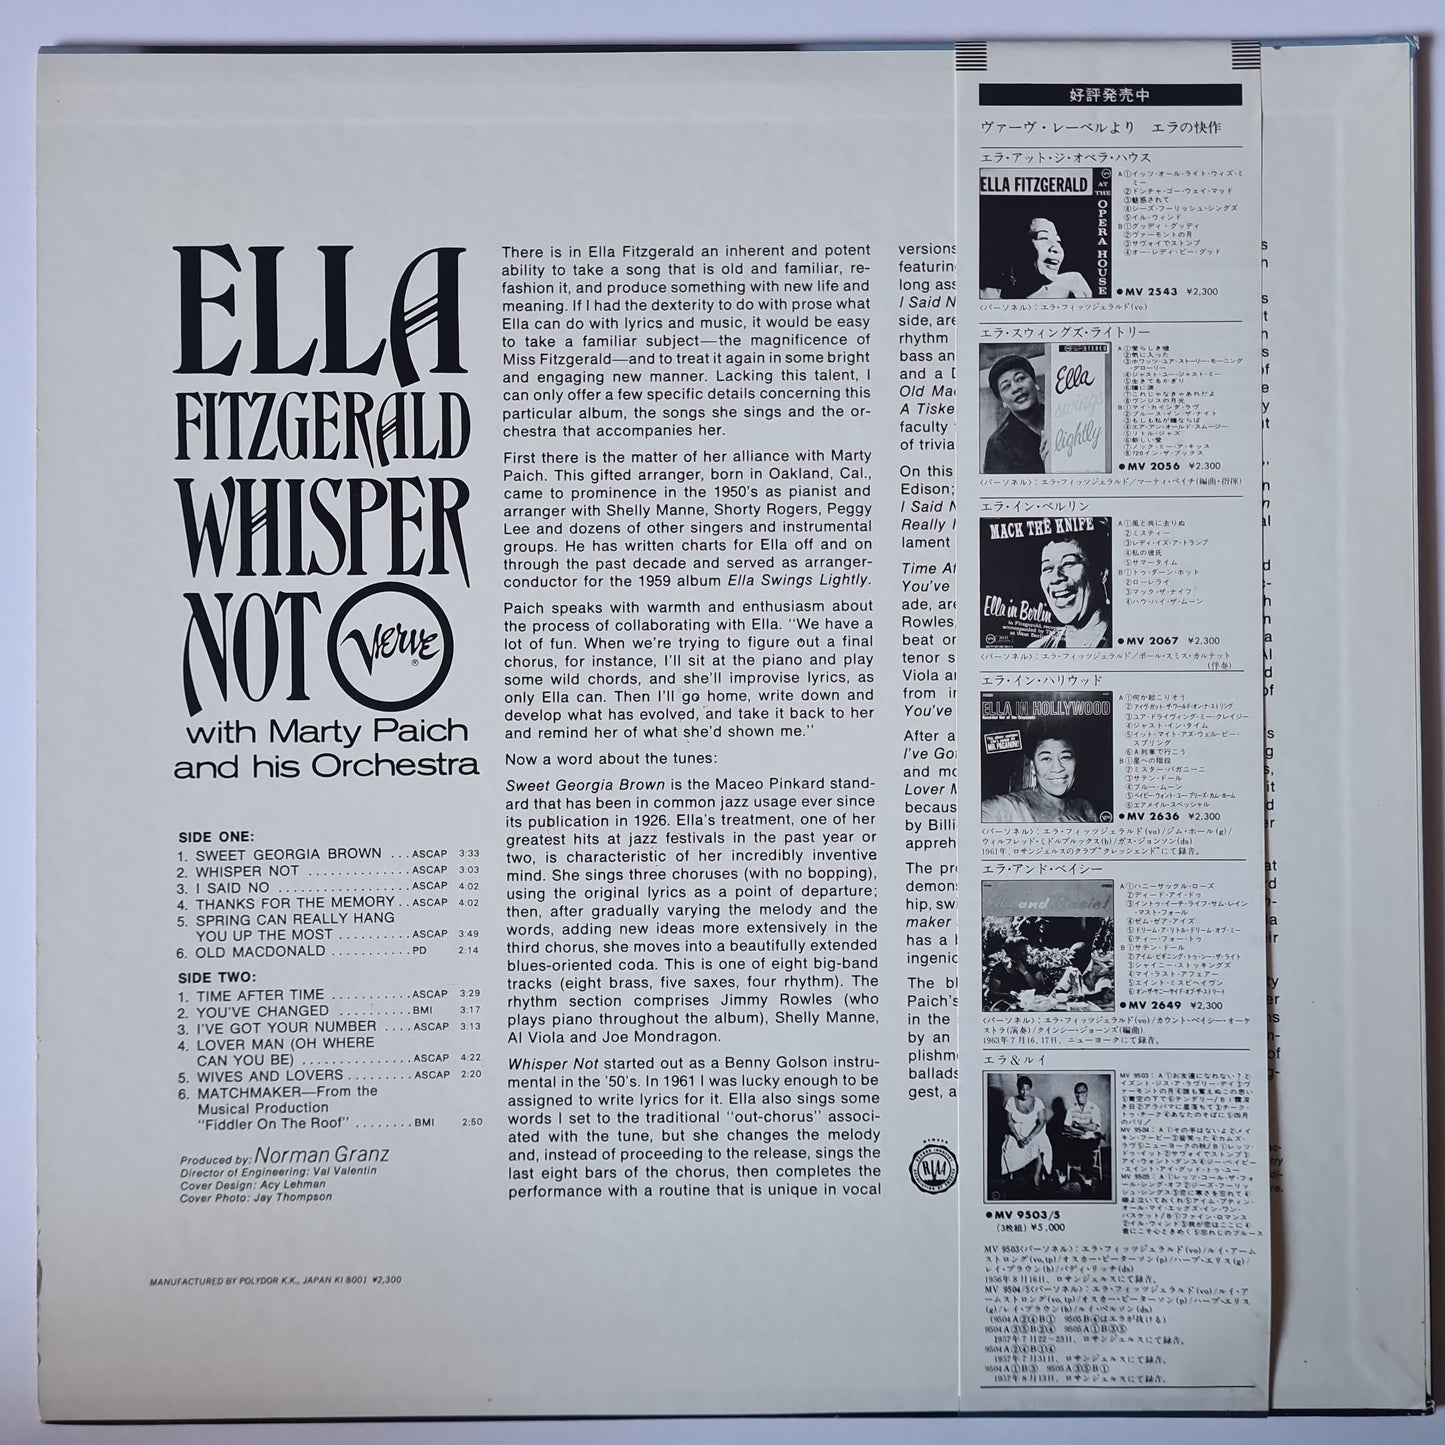 Ella Fitzgerald With Marty Paich And His Orchestra – Whisper Not - 1980 Pressing - Vinyl Record